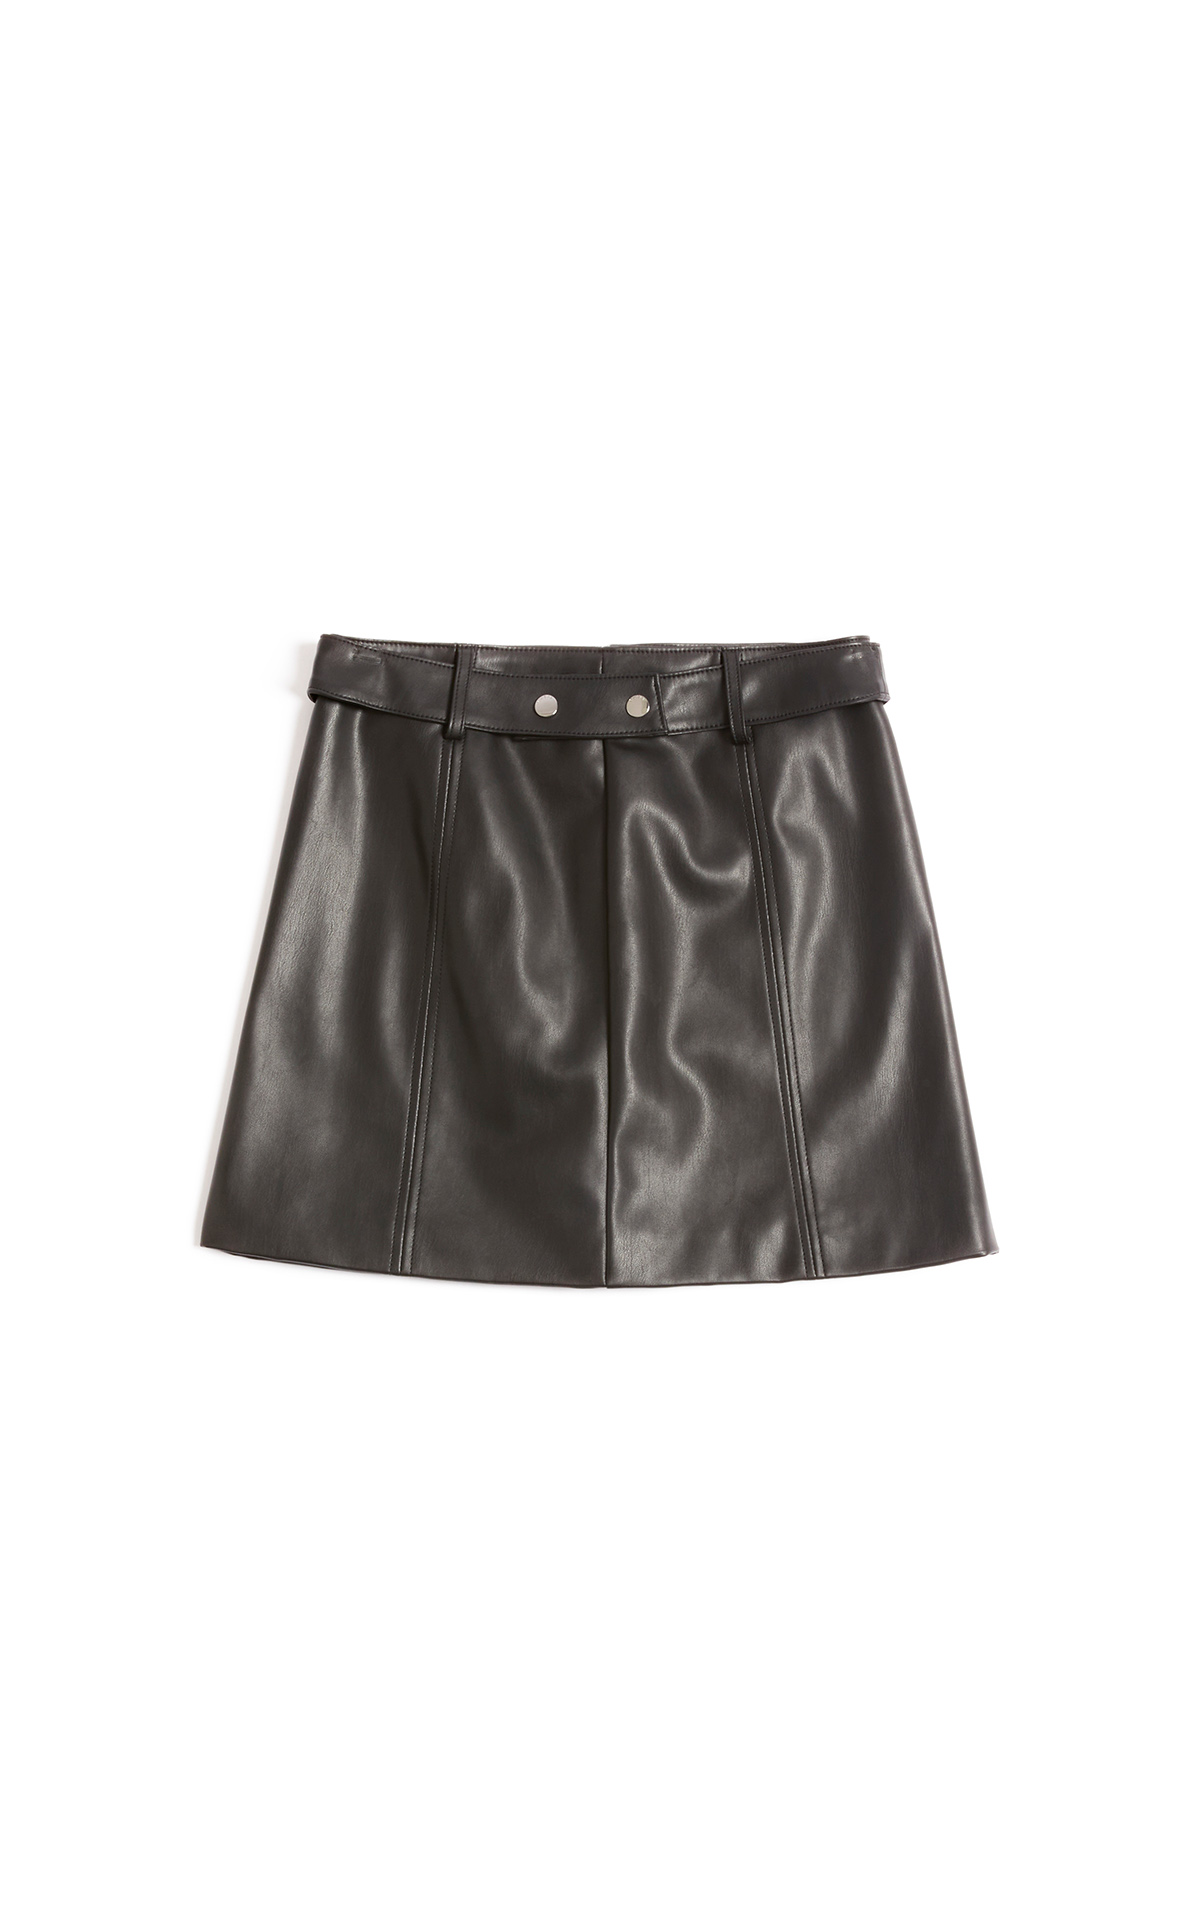 Guess black leather skirt